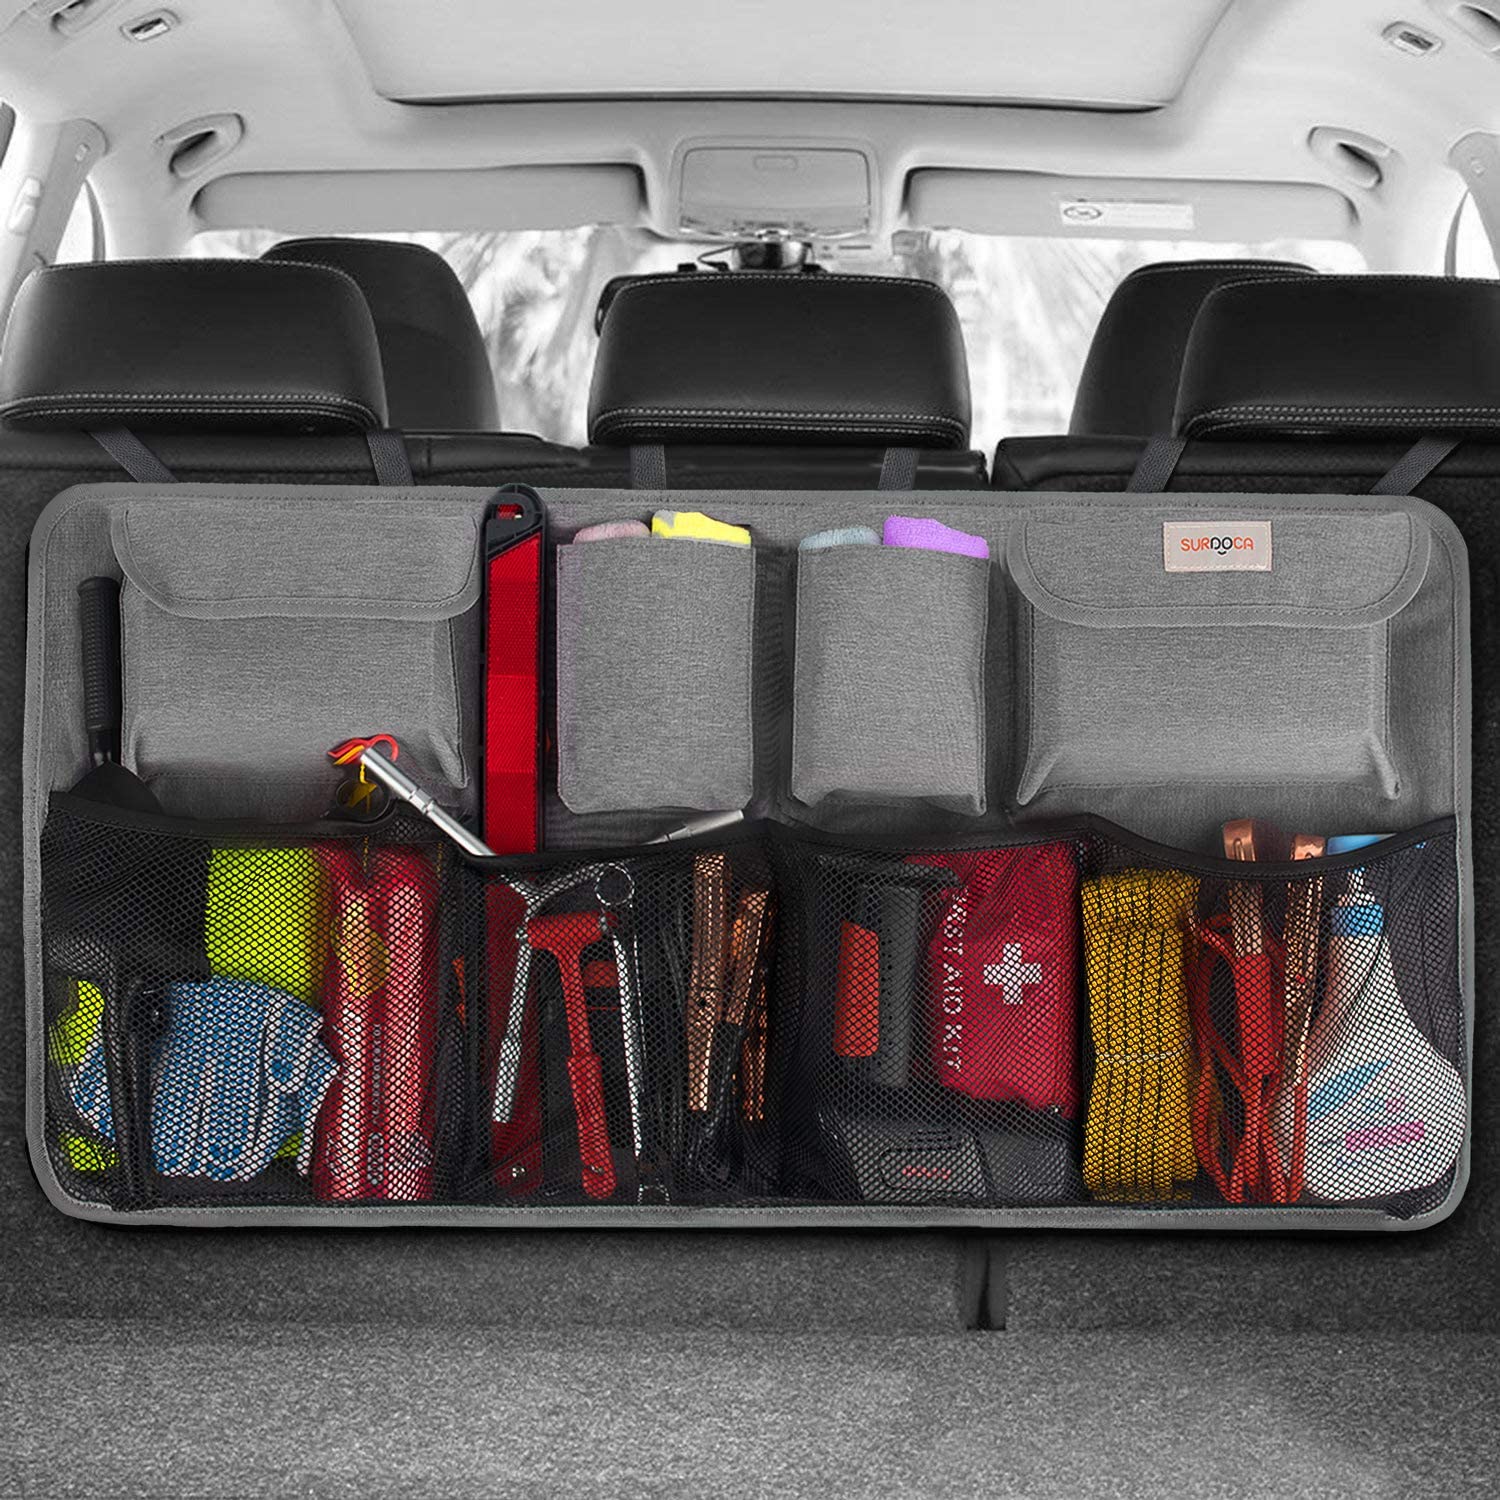 The 10 Best Car Organizers in 2023 - Top Organizers for Your Car